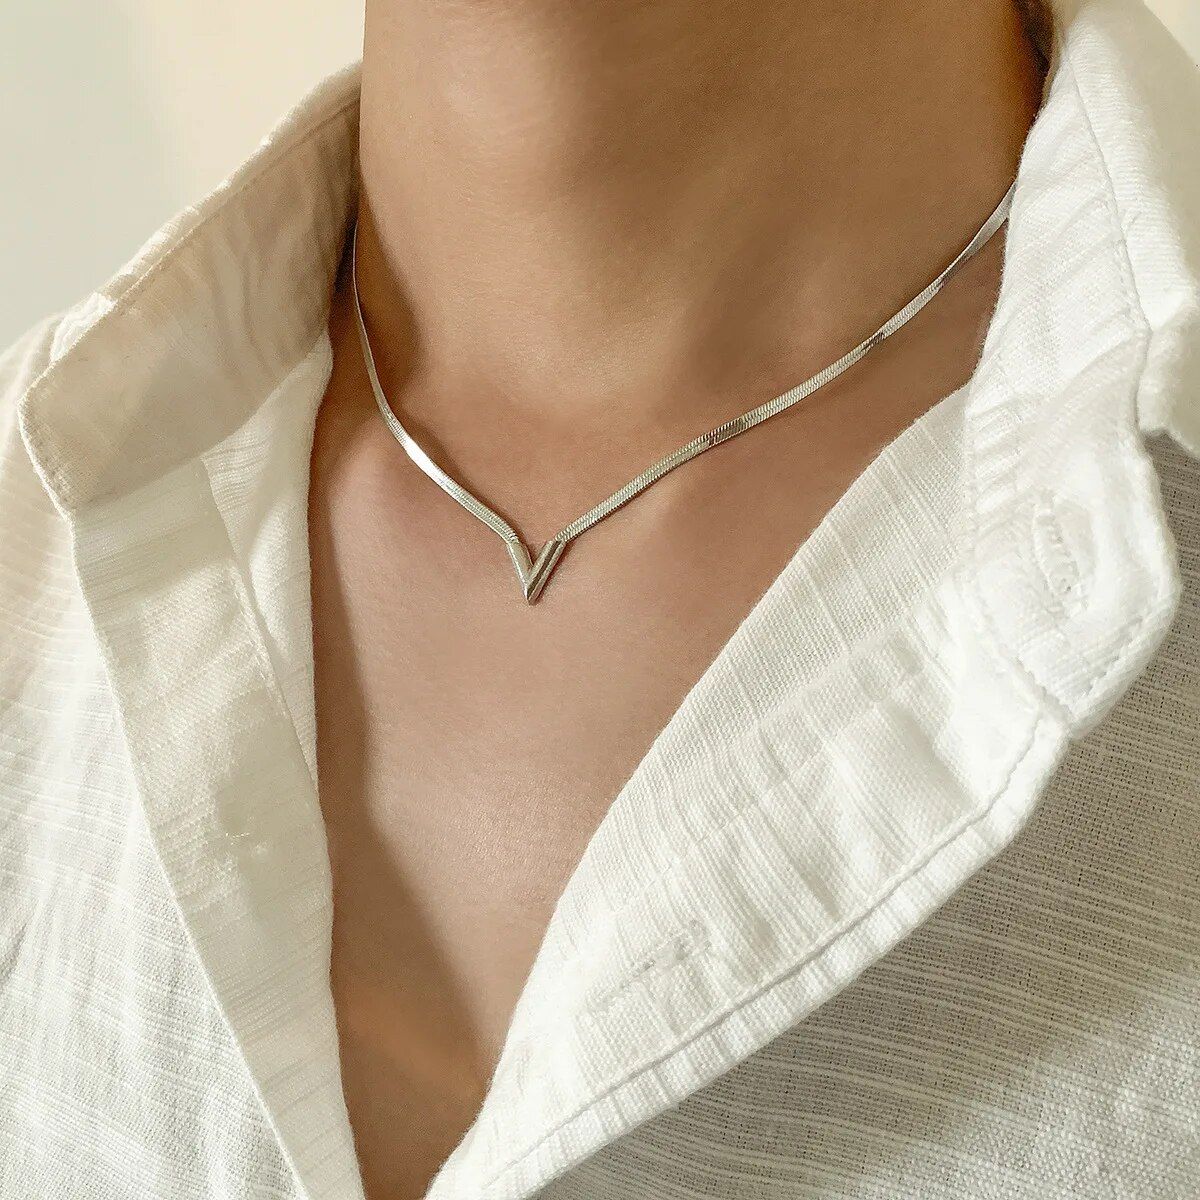 A close-up of a person wearing a stylish Elegant V-Shaped Flat Snake Chain Necklace over a white blouse, following new fashion trends at the neckline area.